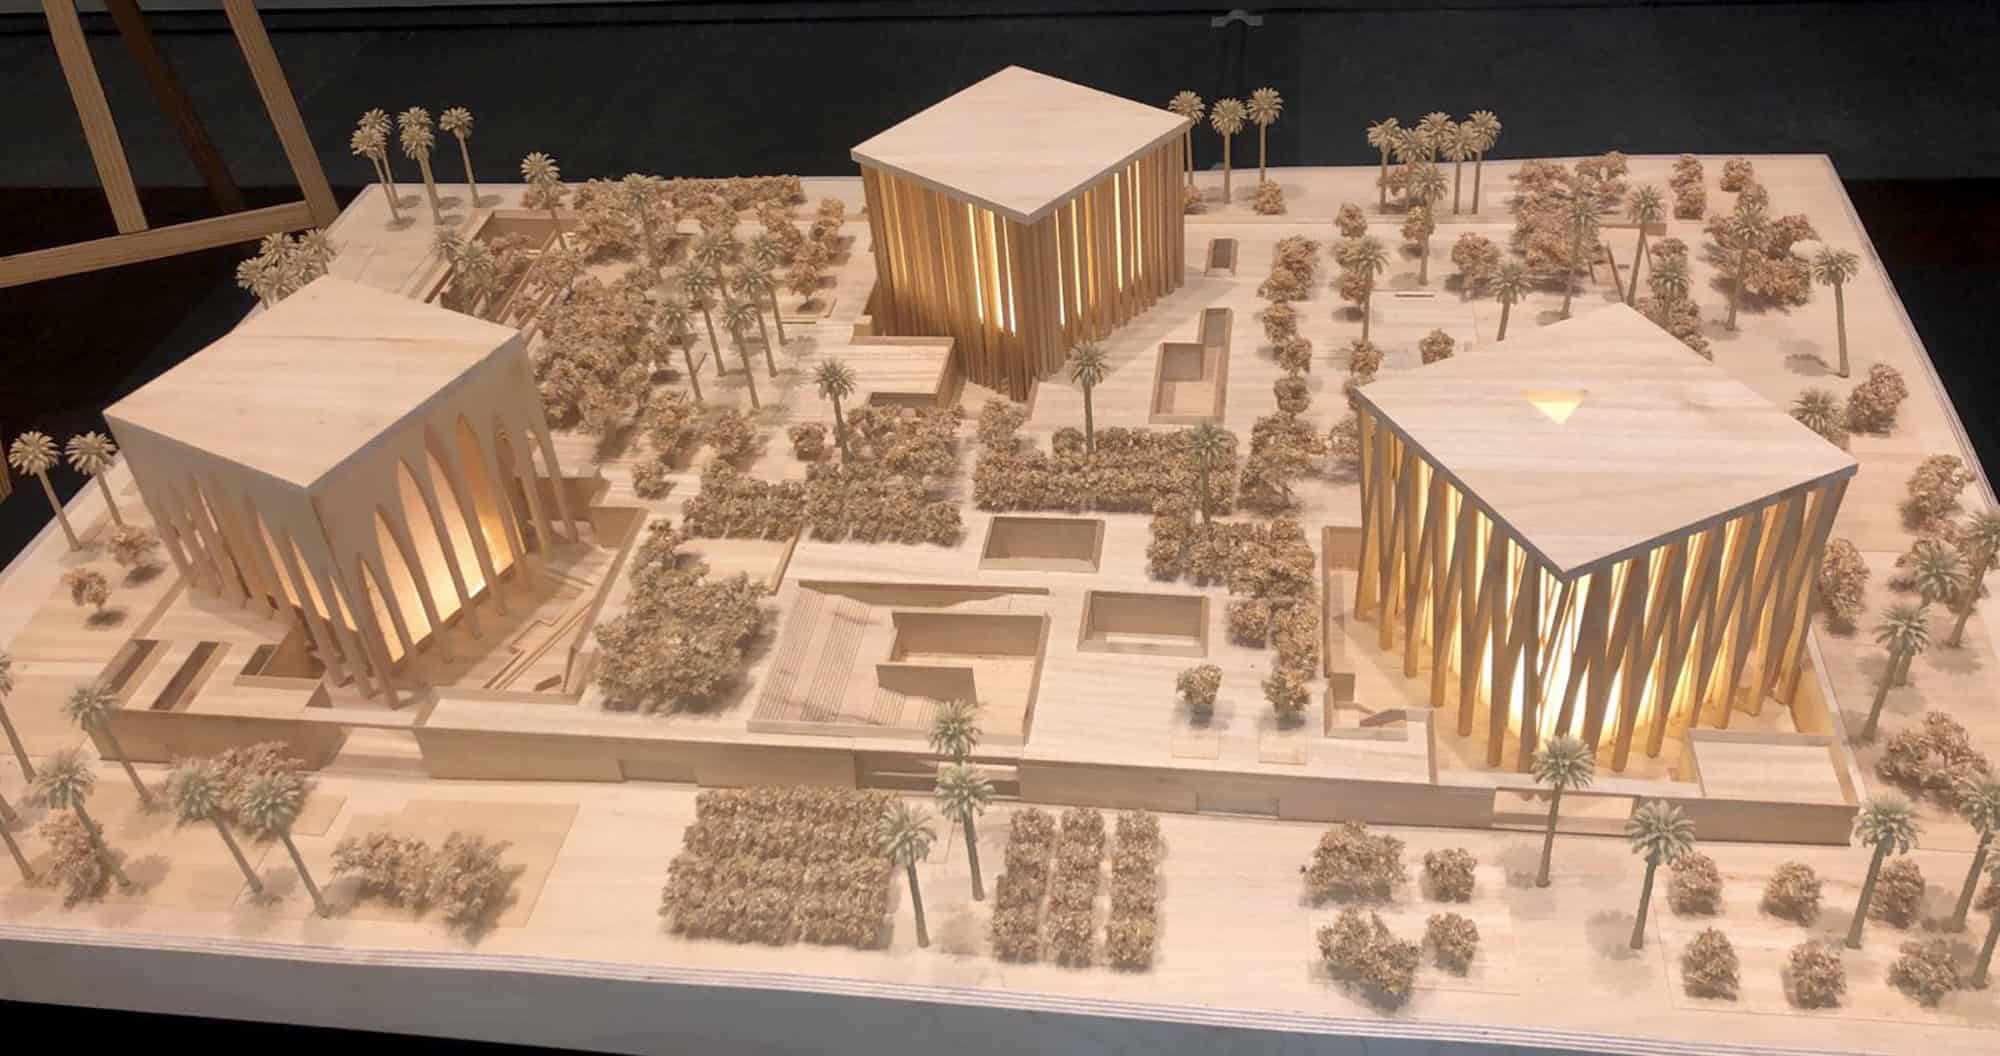 A physical table top model shows to the Abrahamic Family House complex.